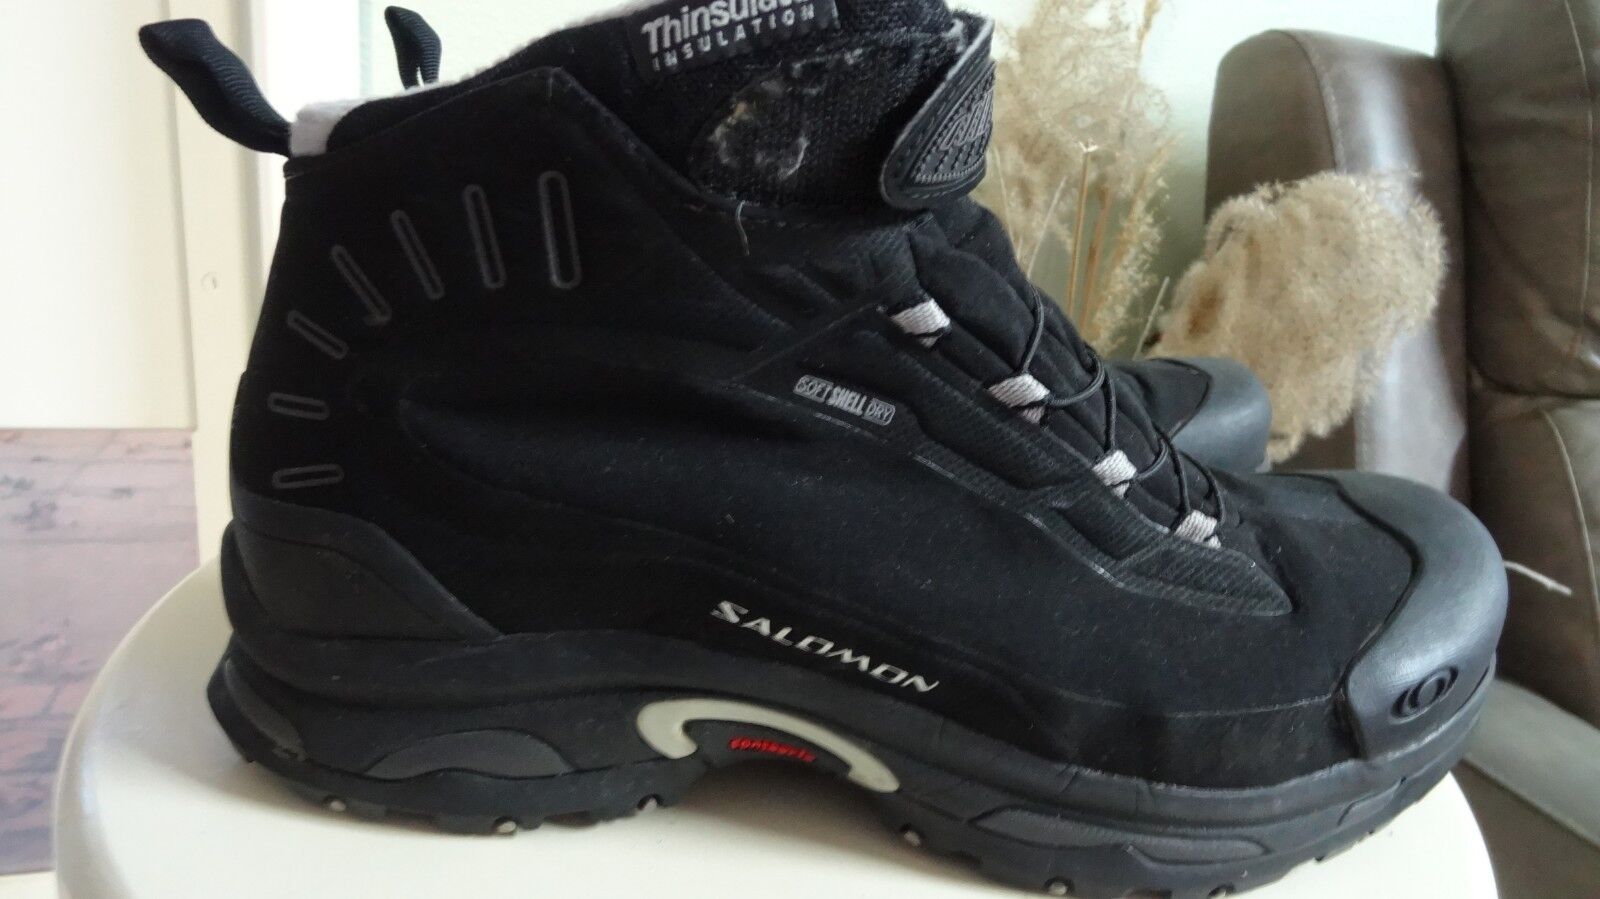 Salomon Lightweight Hiking 8 Boots Fresno Mall 67% OFF of fixed price Women's